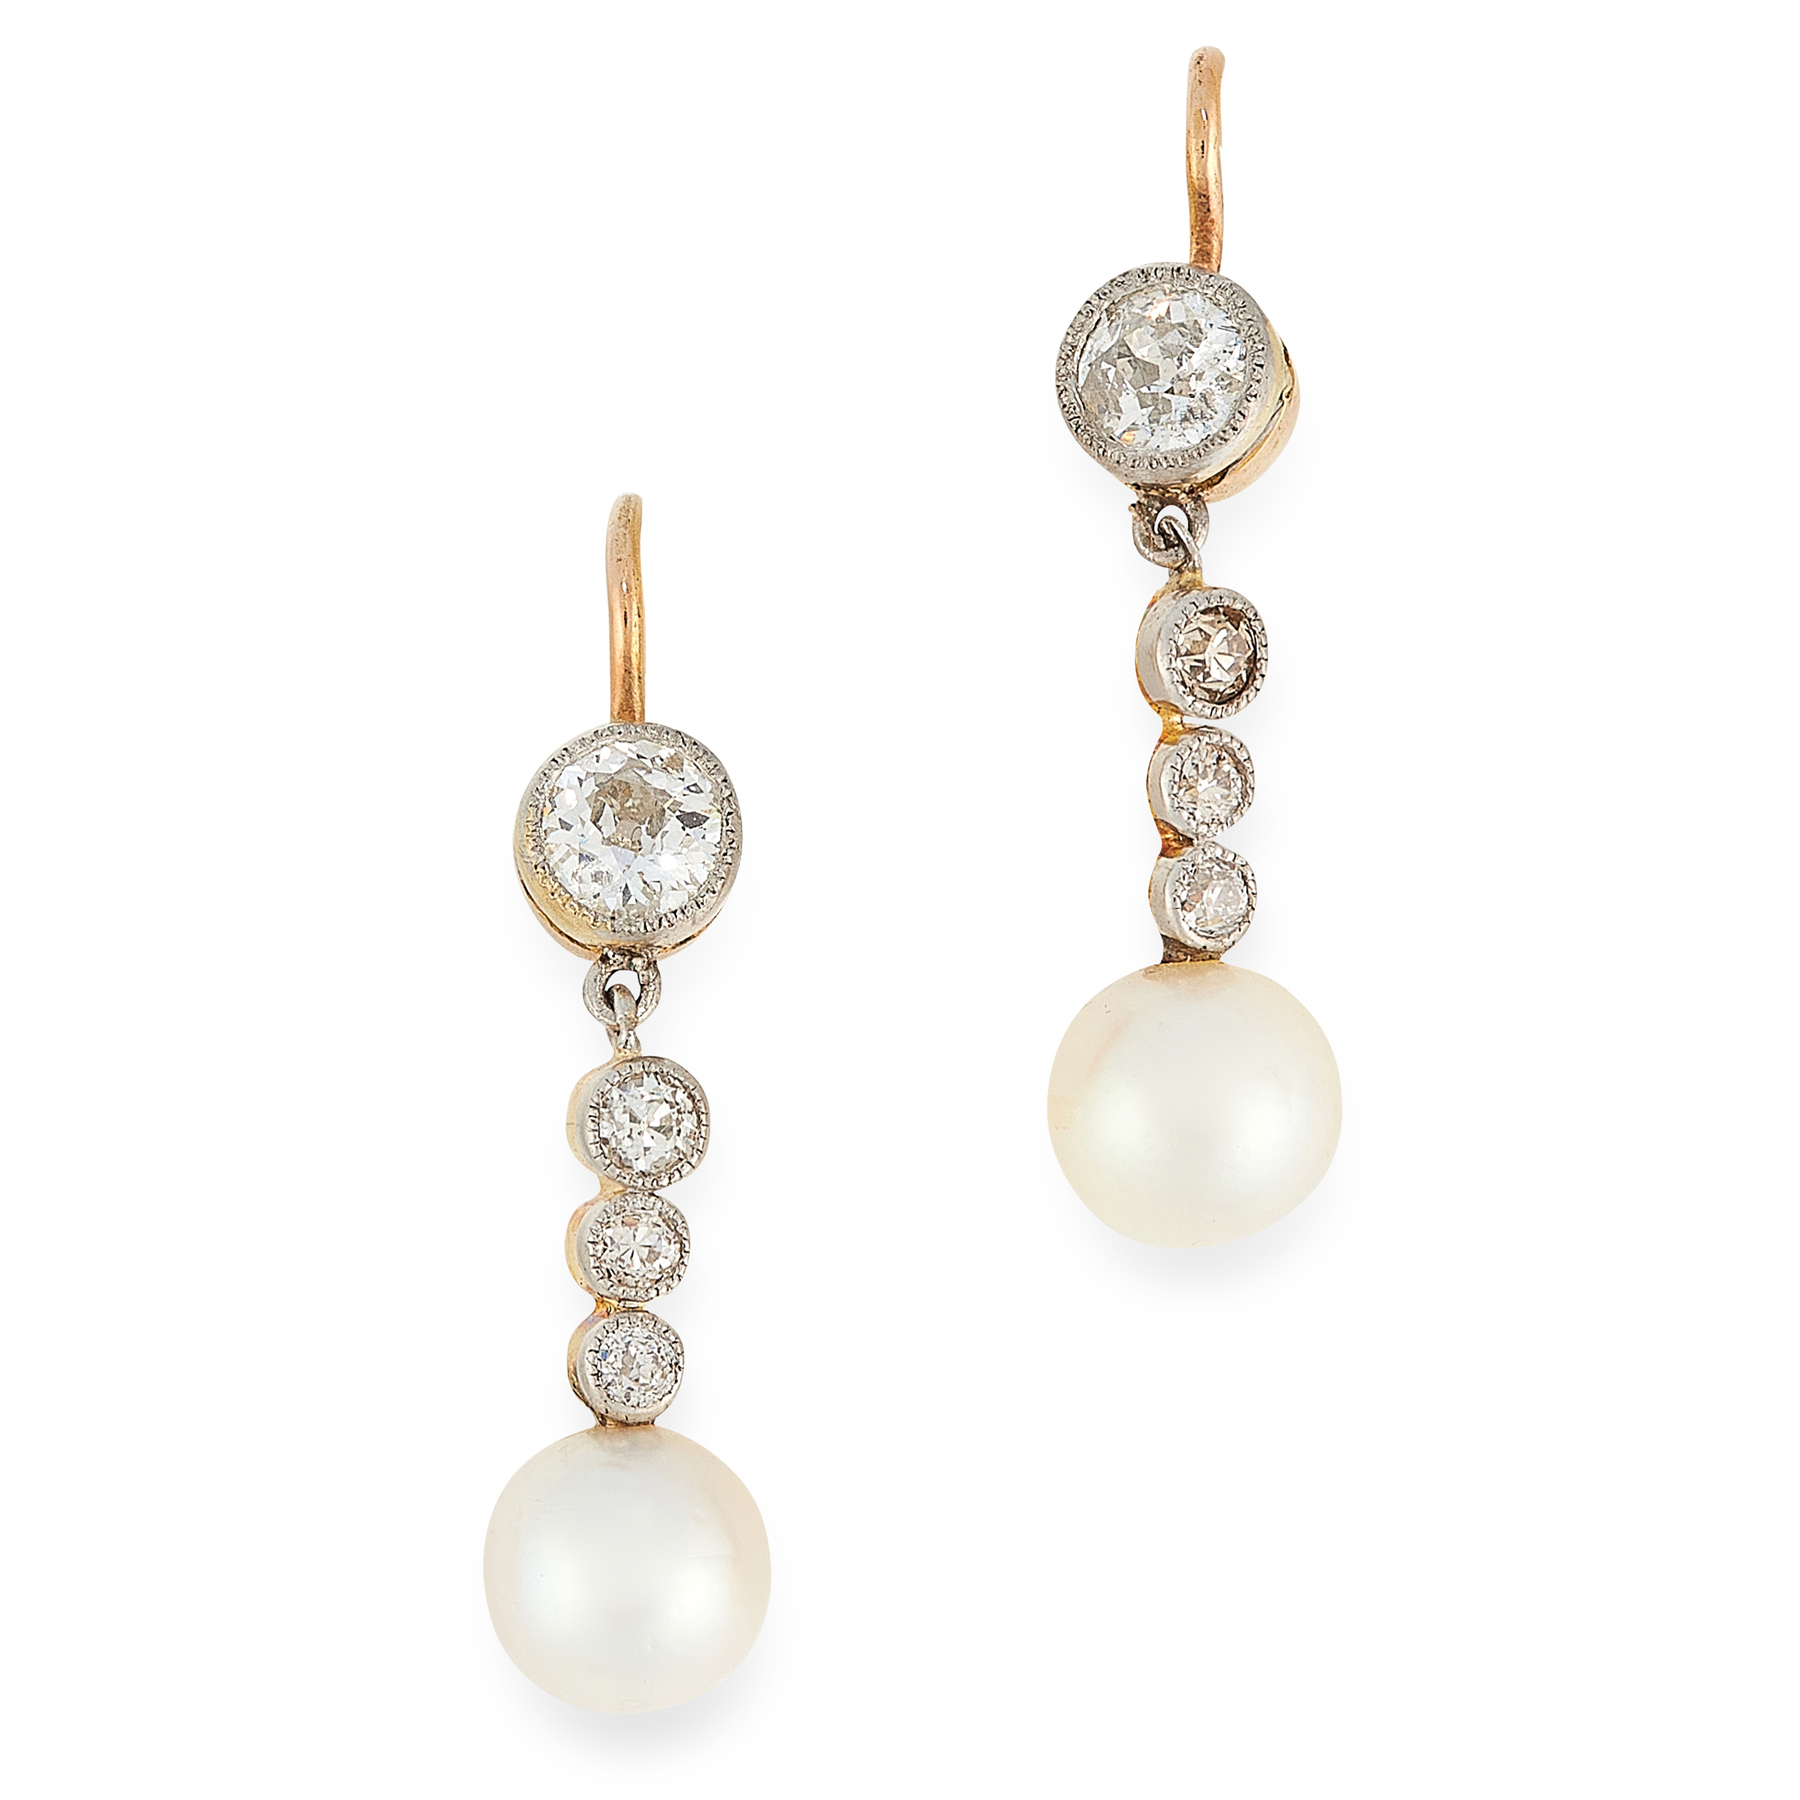 A PAIR OF DIAMOND AND PEARL DROP EARRINGS in yellow gold and silver, each set with a row of round